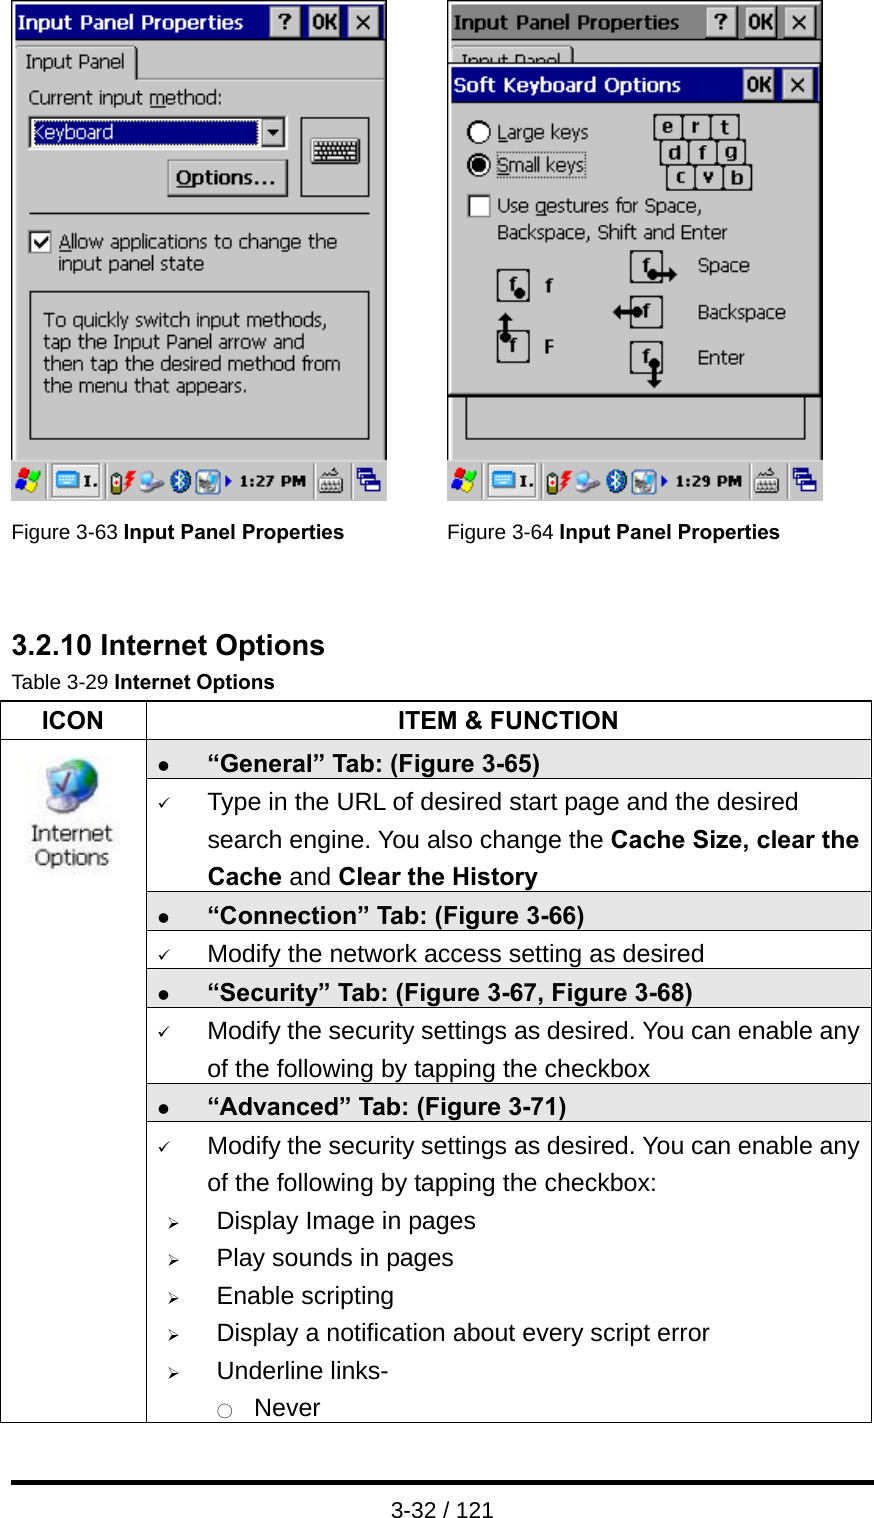  3-32 / 121    Figure 3-63 Input Panel Properties  Figure 3-64 Input Panel Properties   3.2.10 Internet Options Table 3-29 Internet Options ICON  ITEM &amp; FUNCTION z “General” Tab: (Figure 3-65) 9 Type in the URL of desired start page and the desired search engine. You also change the Cache Size, clear the Cache and Clear the History z “Connection” Tab: (Figure 3-66) 9 Modify the network access setting as desired z “Security” Tab: (Figure 3-67, Figure 3-68) 9 Modify the security settings as desired. You can enable any of the following by tapping the checkbox z “Advanced” Tab: (Figure 3-71)                9 Modify the security settings as desired. You can enable any of the following by tapping the checkbox: ¾ Display Image in pages ¾ Play sounds in pages ¾ Enable scripting ¾ Display a notification about every script error ¾ Underline links- ○  Never 